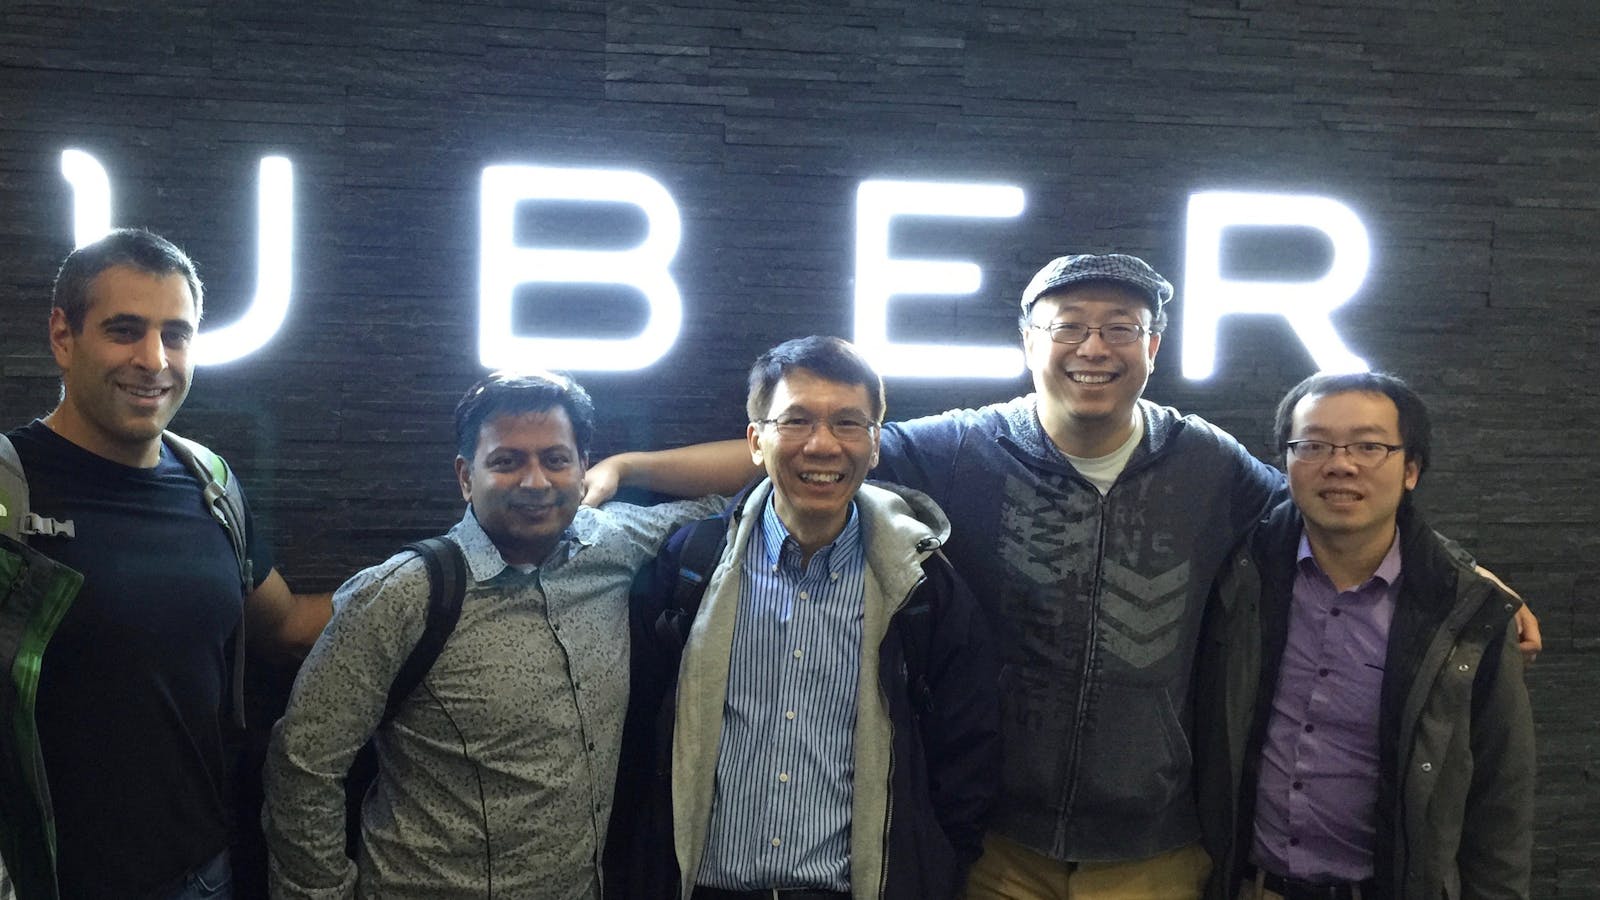 Uber's Chief Technology Officer Thuan Pham, center, with fellow engineers.